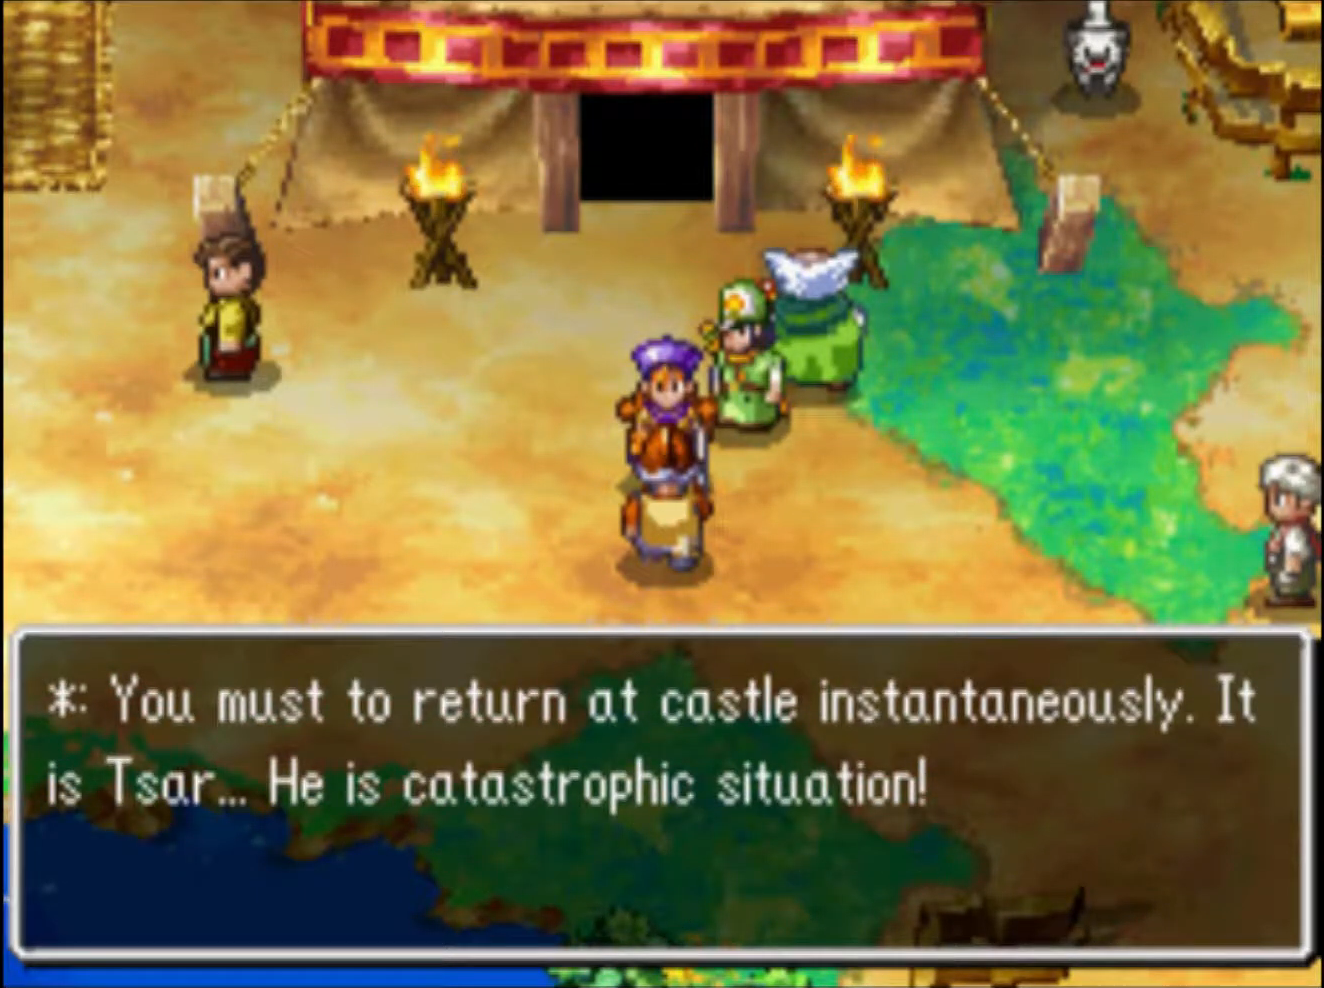 This soldier will urge you to get back to your castle | Dragon Quest IV